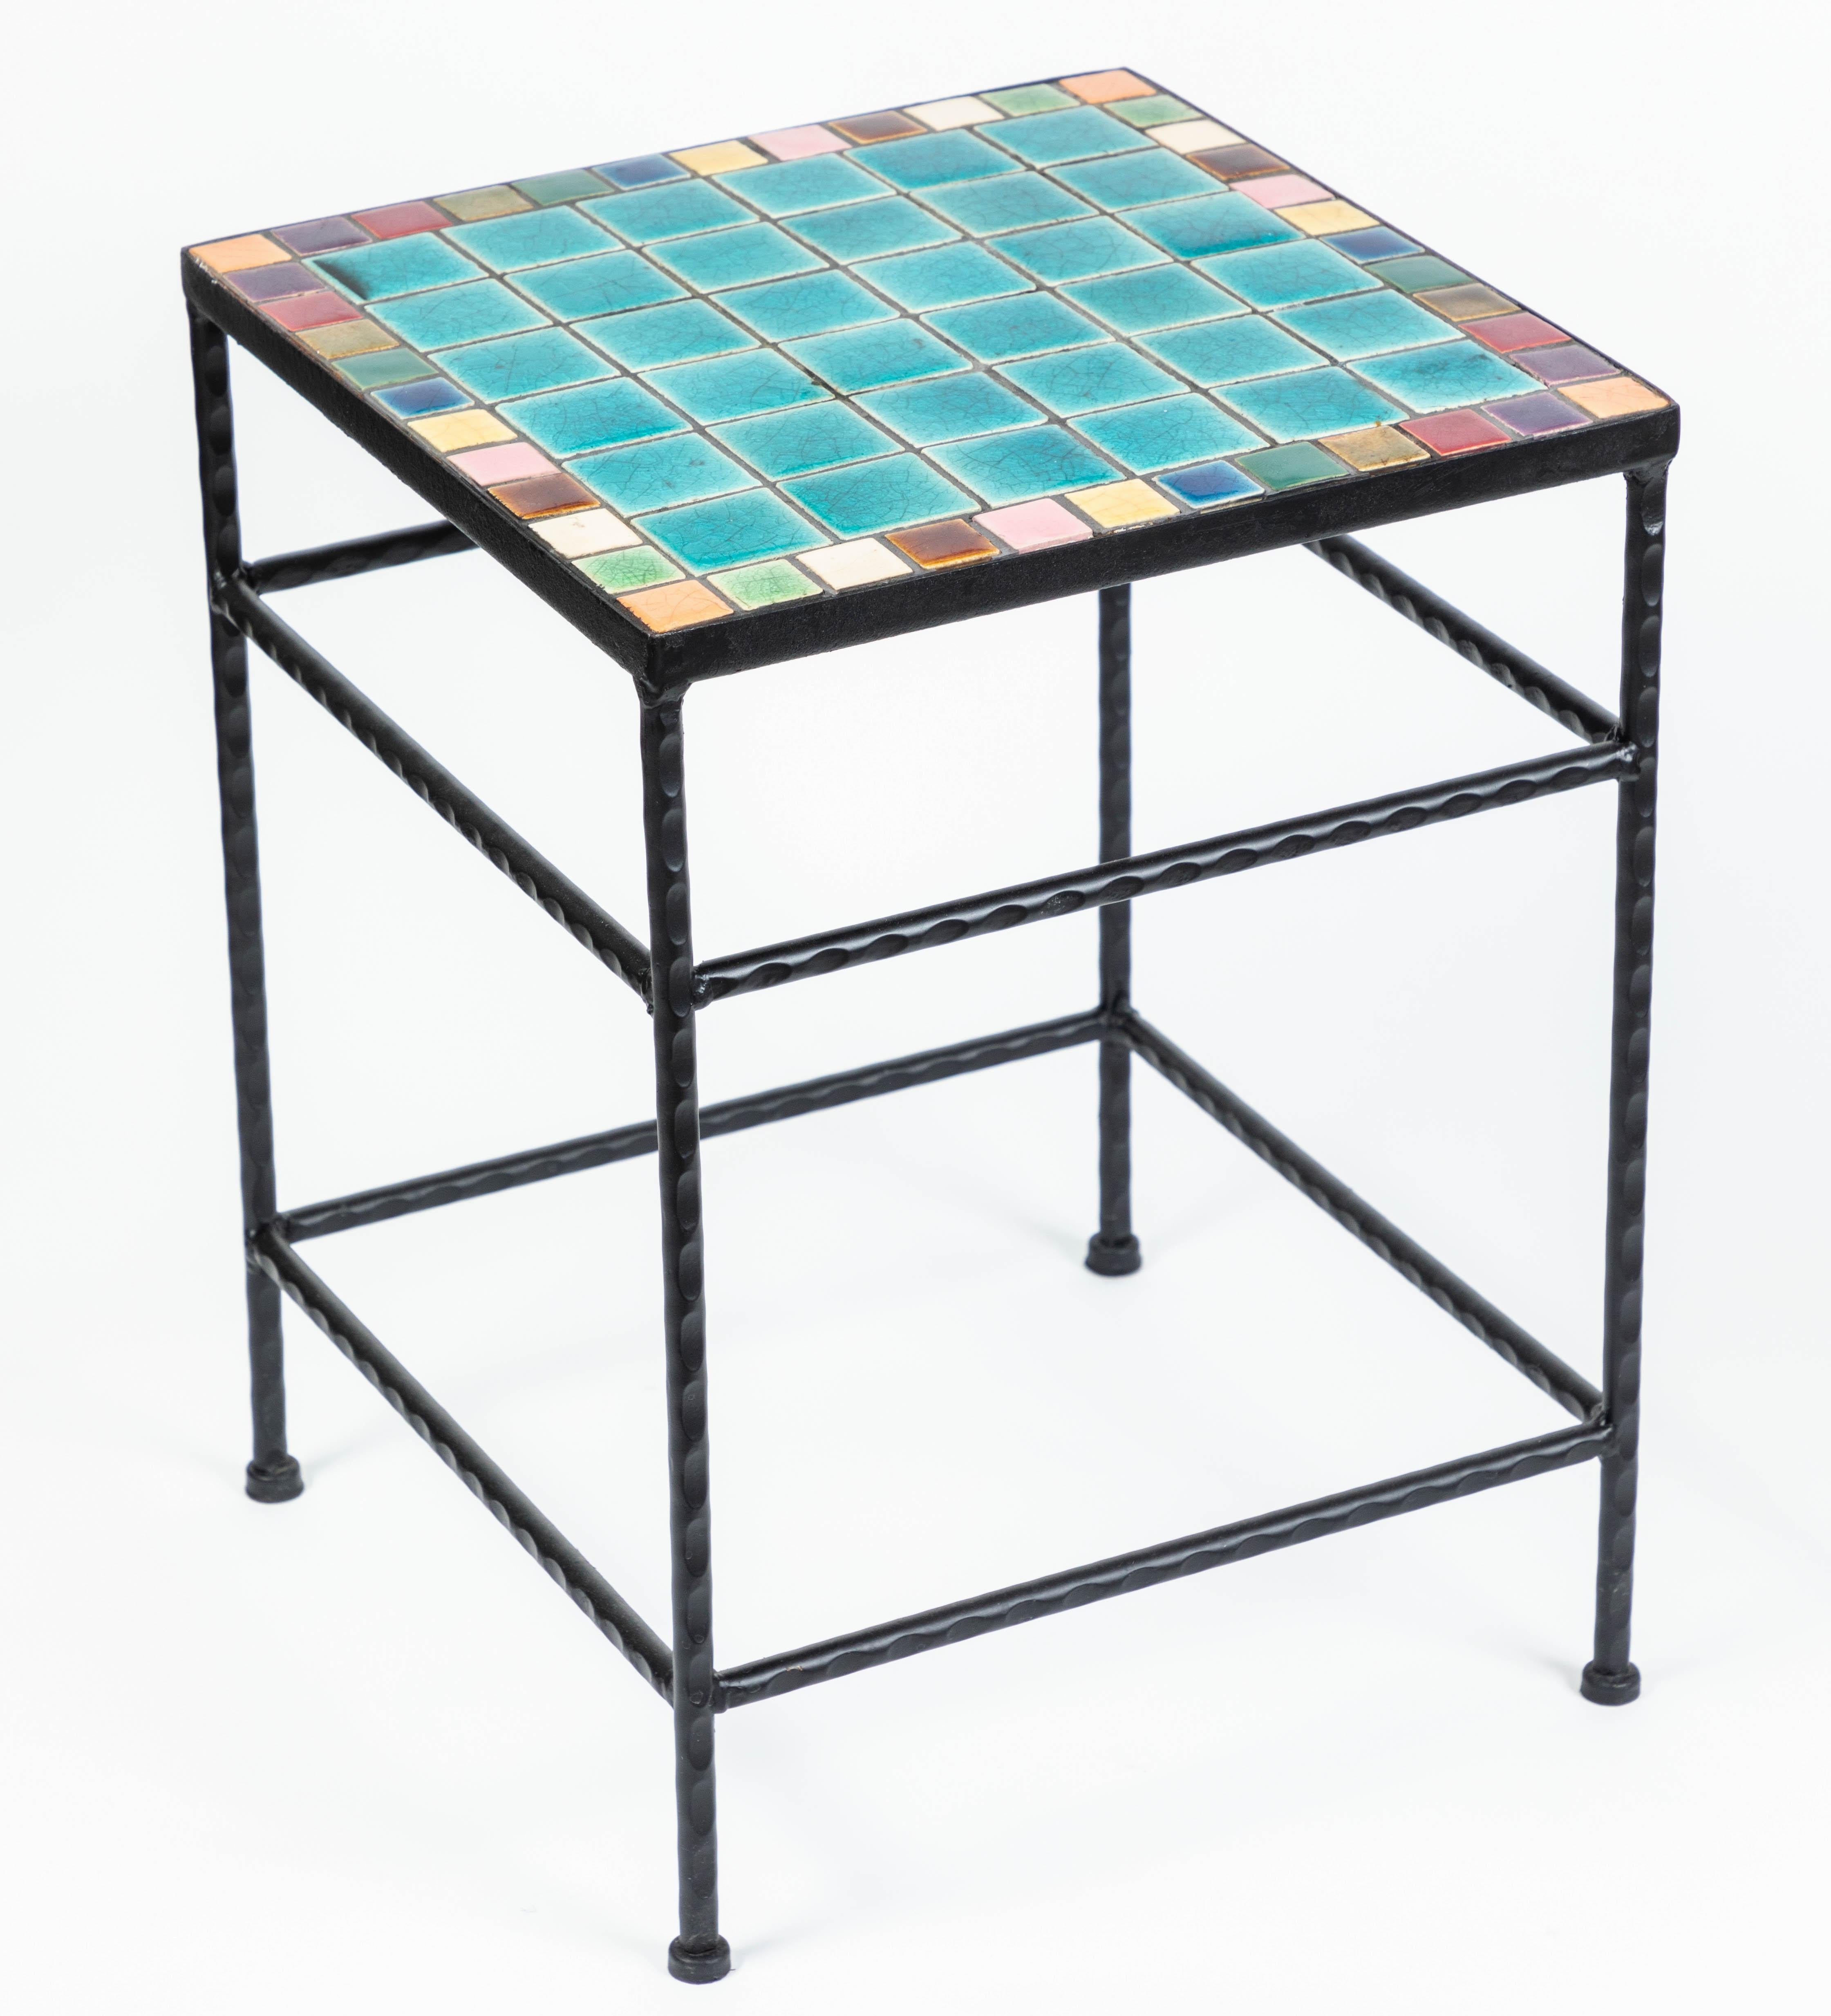 Mid-Century Modern Pair of Vintage Black Iron and Tile Top Side Tables